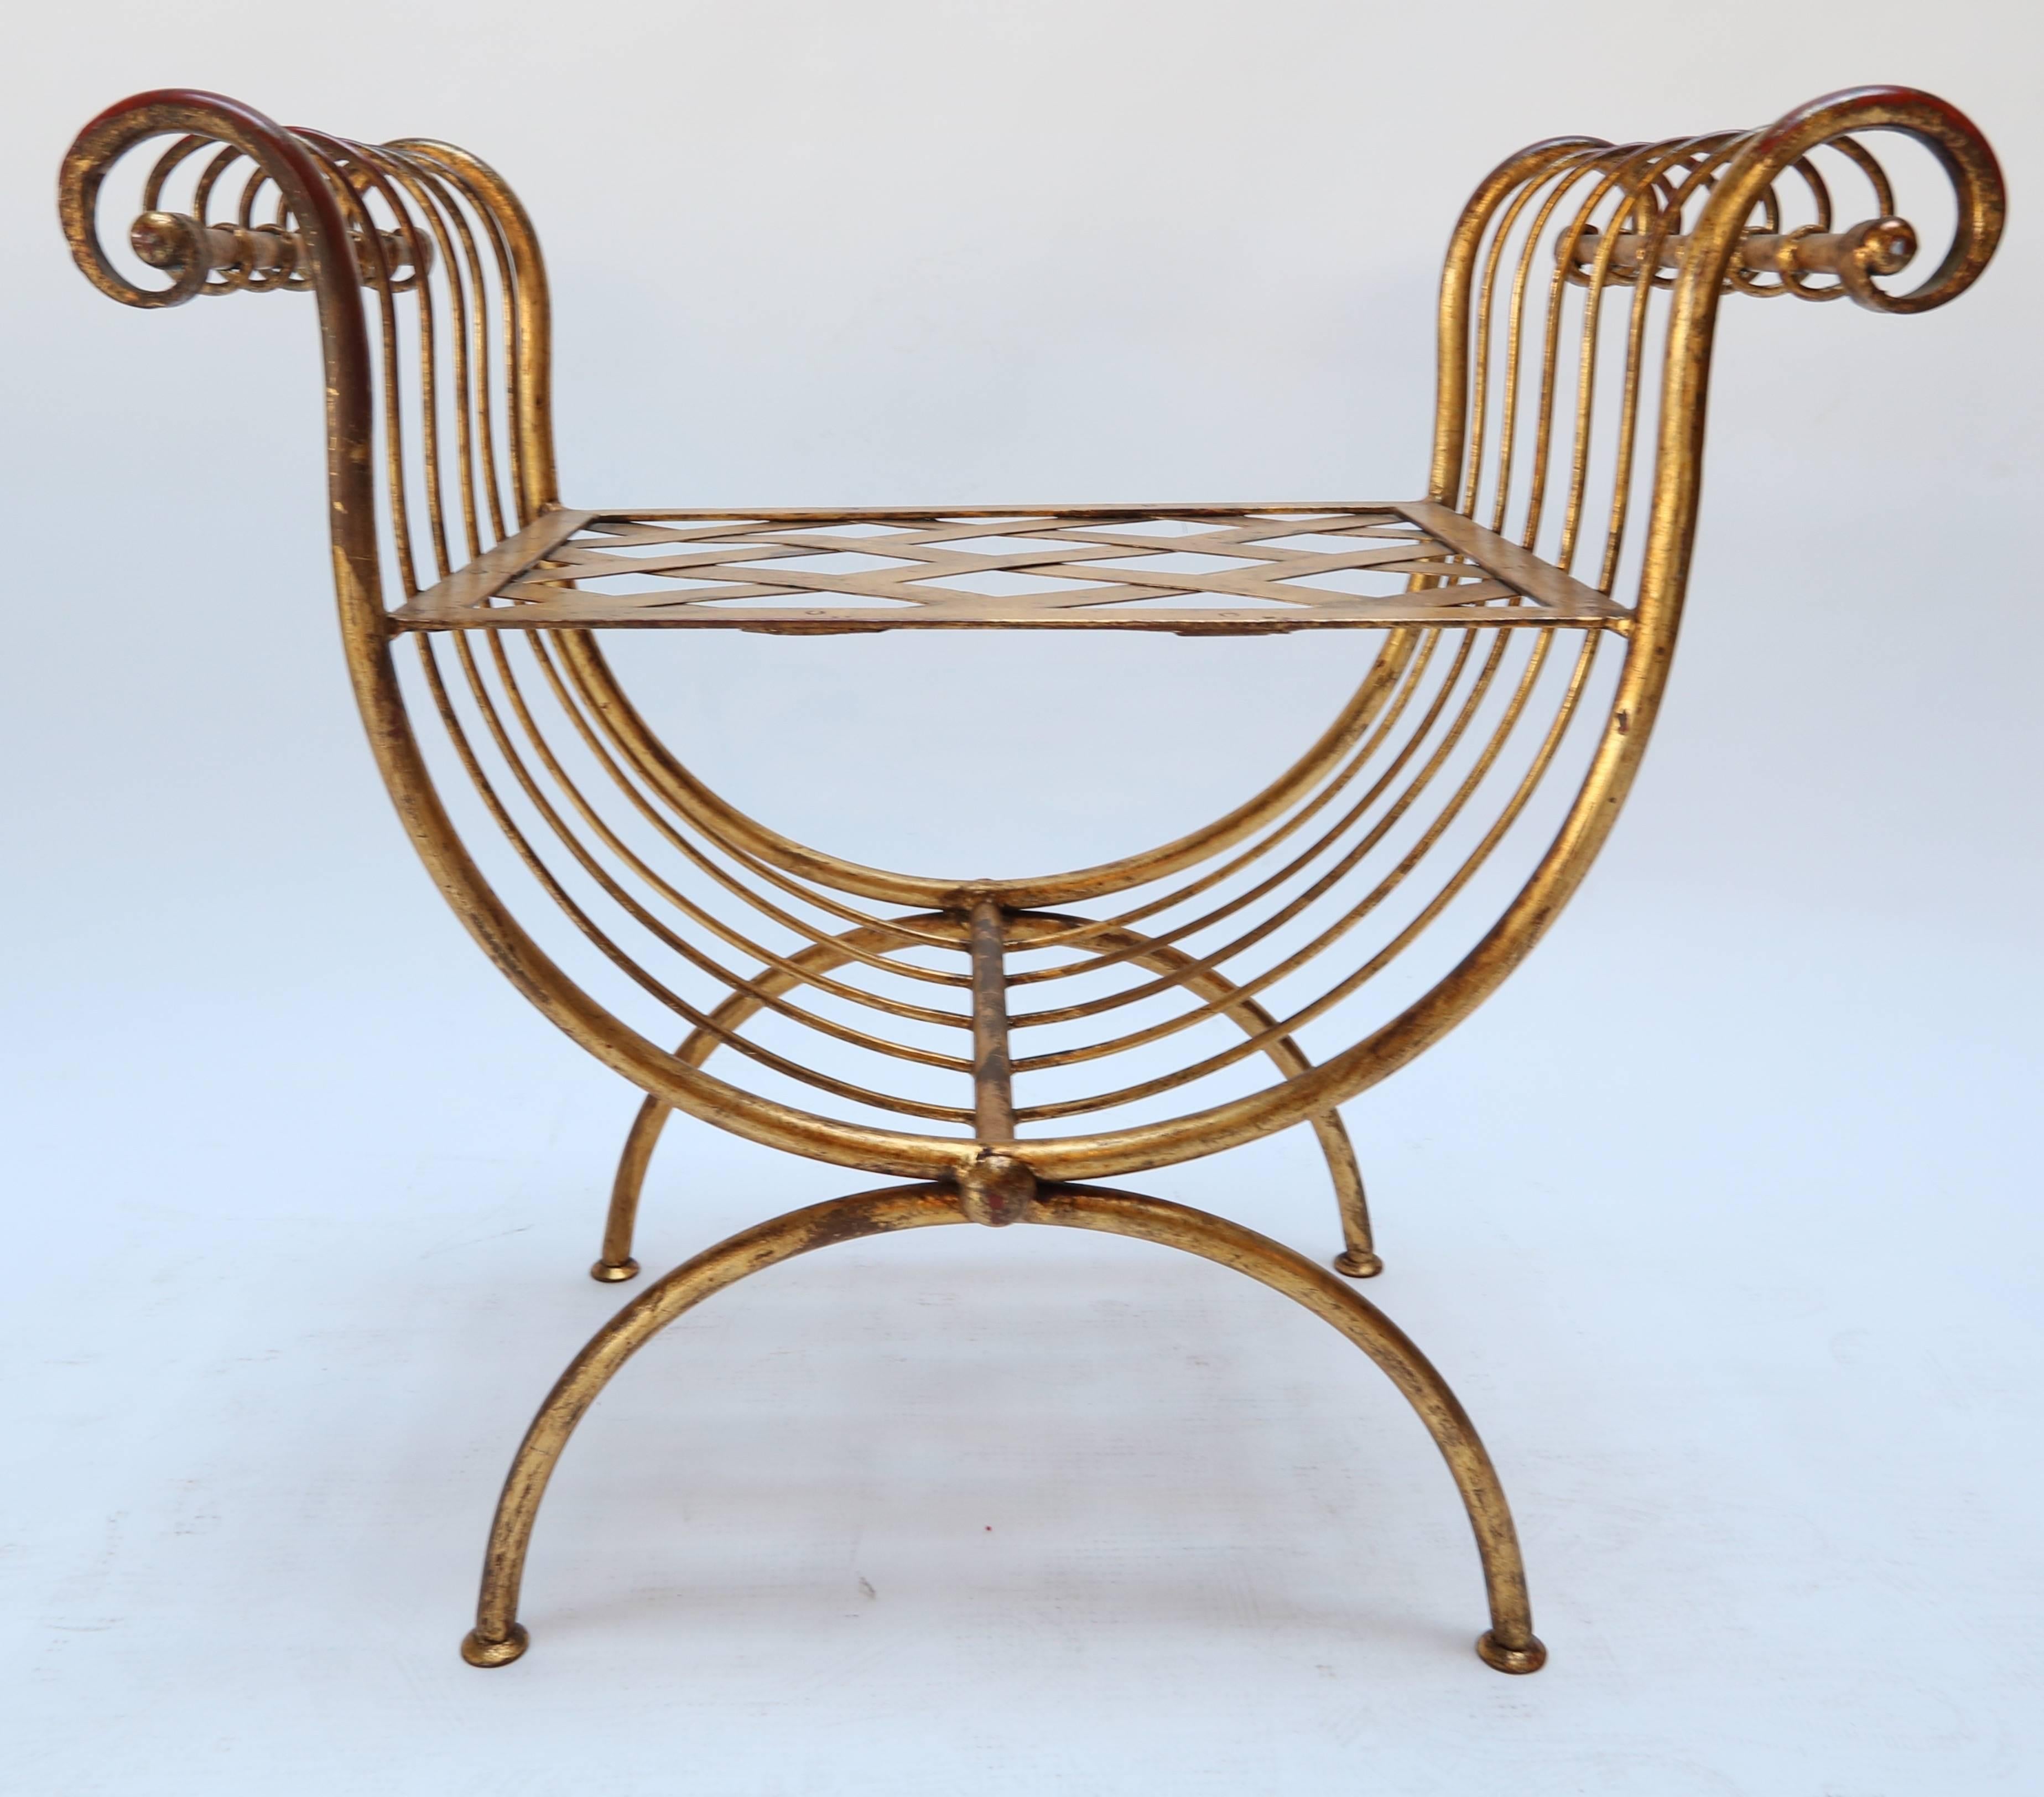 1920s Italian Gilded Metal Stool or Bench In Good Condition For Sale In Los Angeles, CA